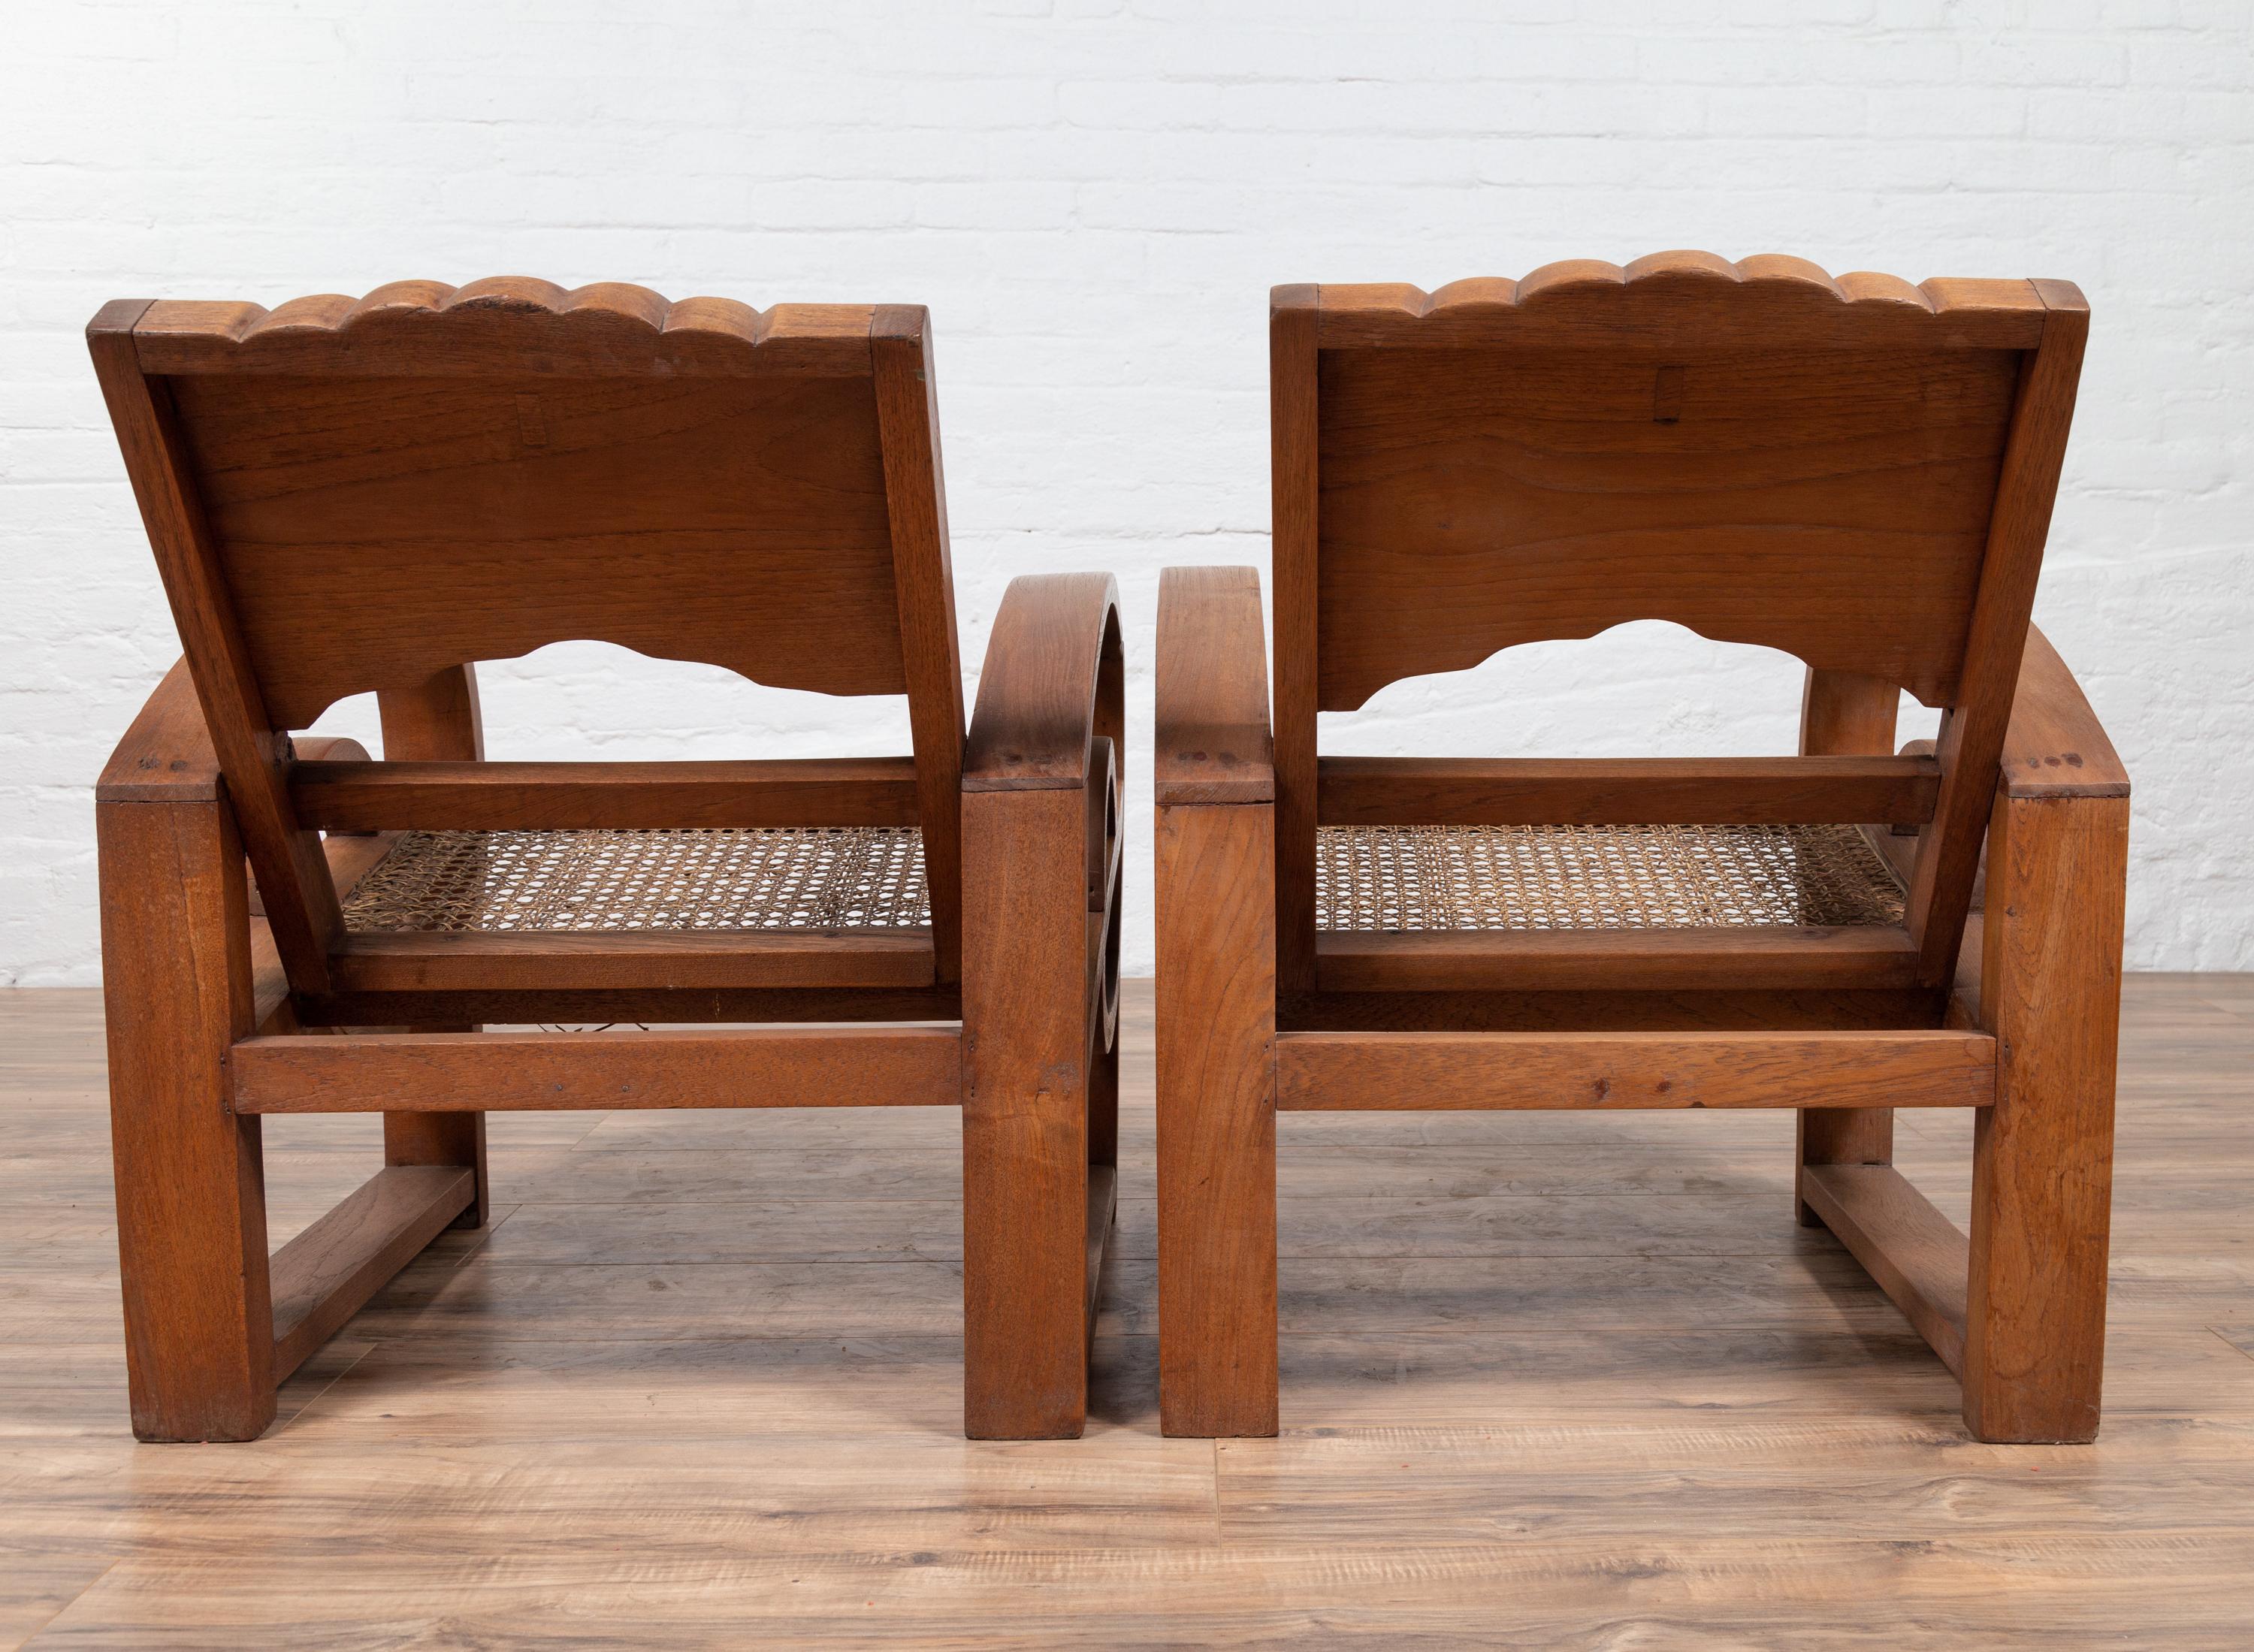 Pair of Teak Wood Country Chairs from Madura with Rattan Seats and Looping Arms 8